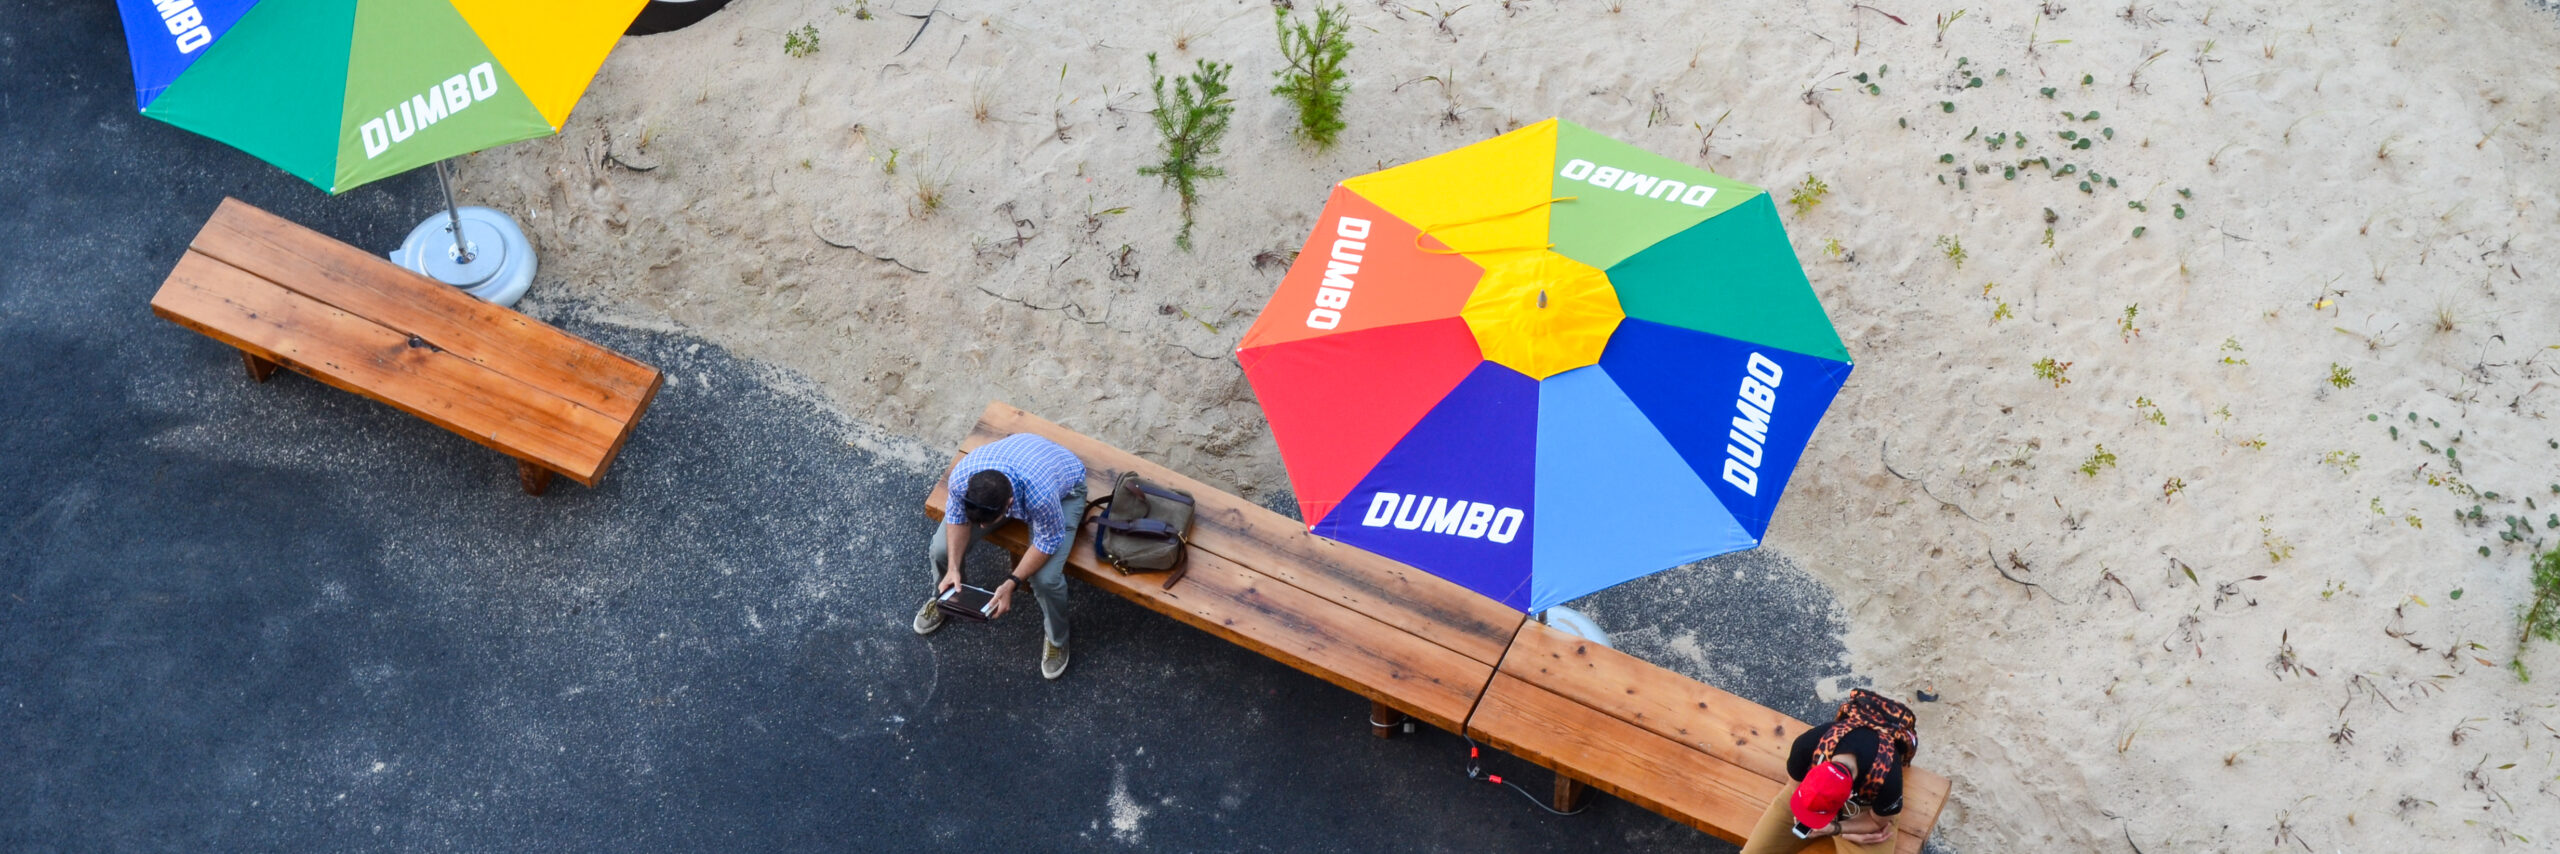 DUMBO Public Art Archive with colorful umbrellas and a couple of people sitting